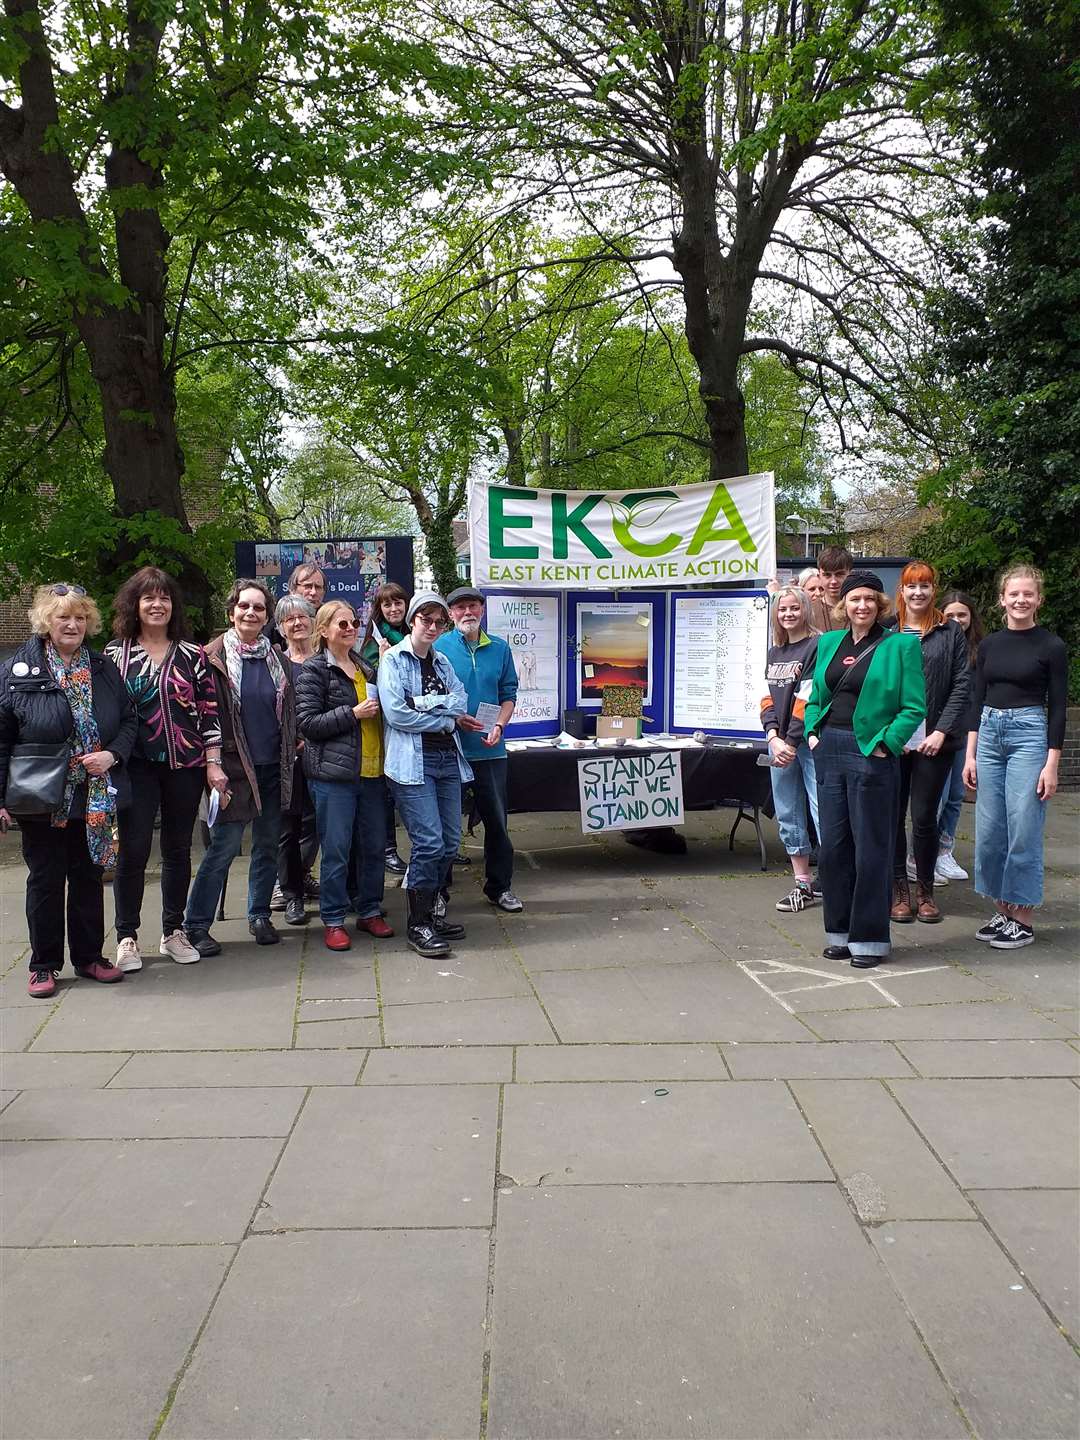 East Kent Climate Action members at the launch outside St George's Church in Deal